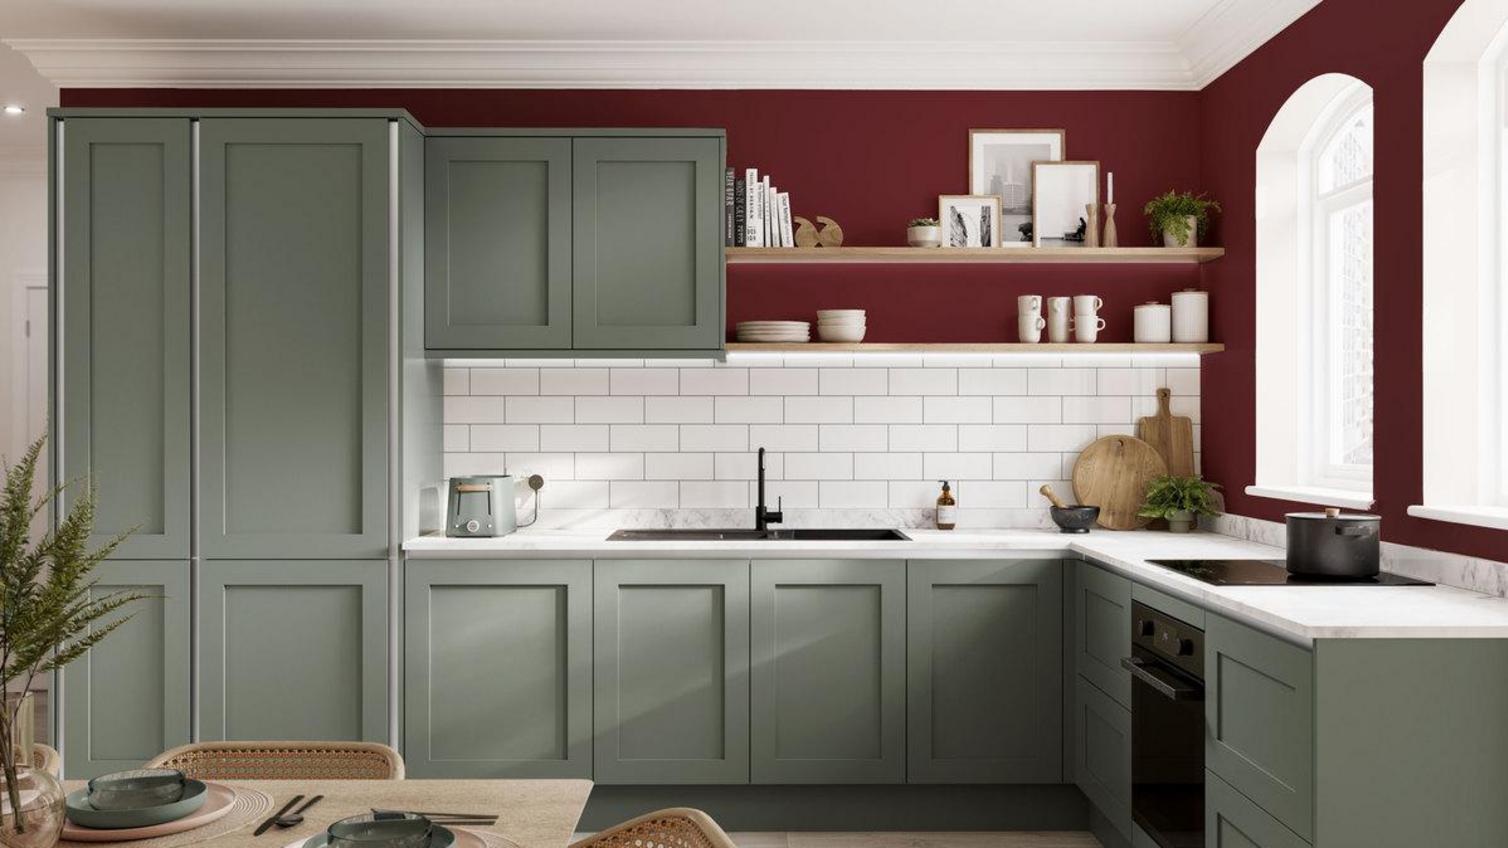 Simple red kitchen idea with a garnet-red feature wall. Includes sage-green shaker units, white worktops, and timber floors.